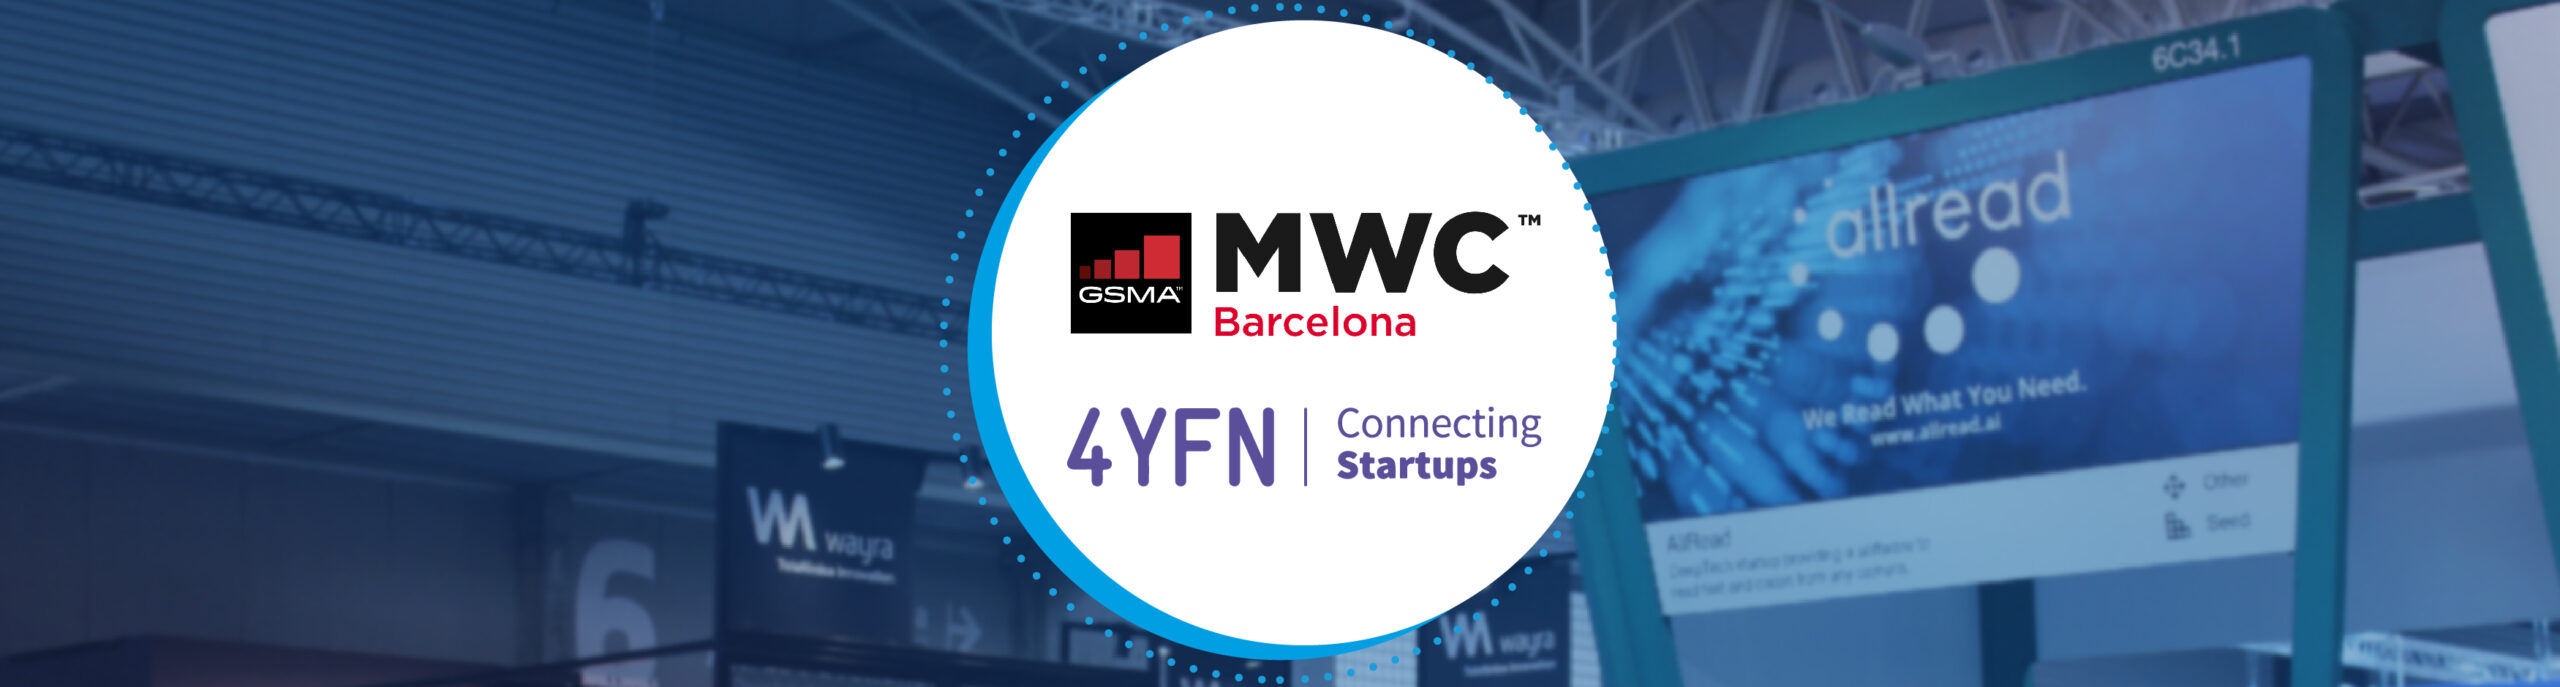 We showcase AllRead’s technology at Mobile World Congress 